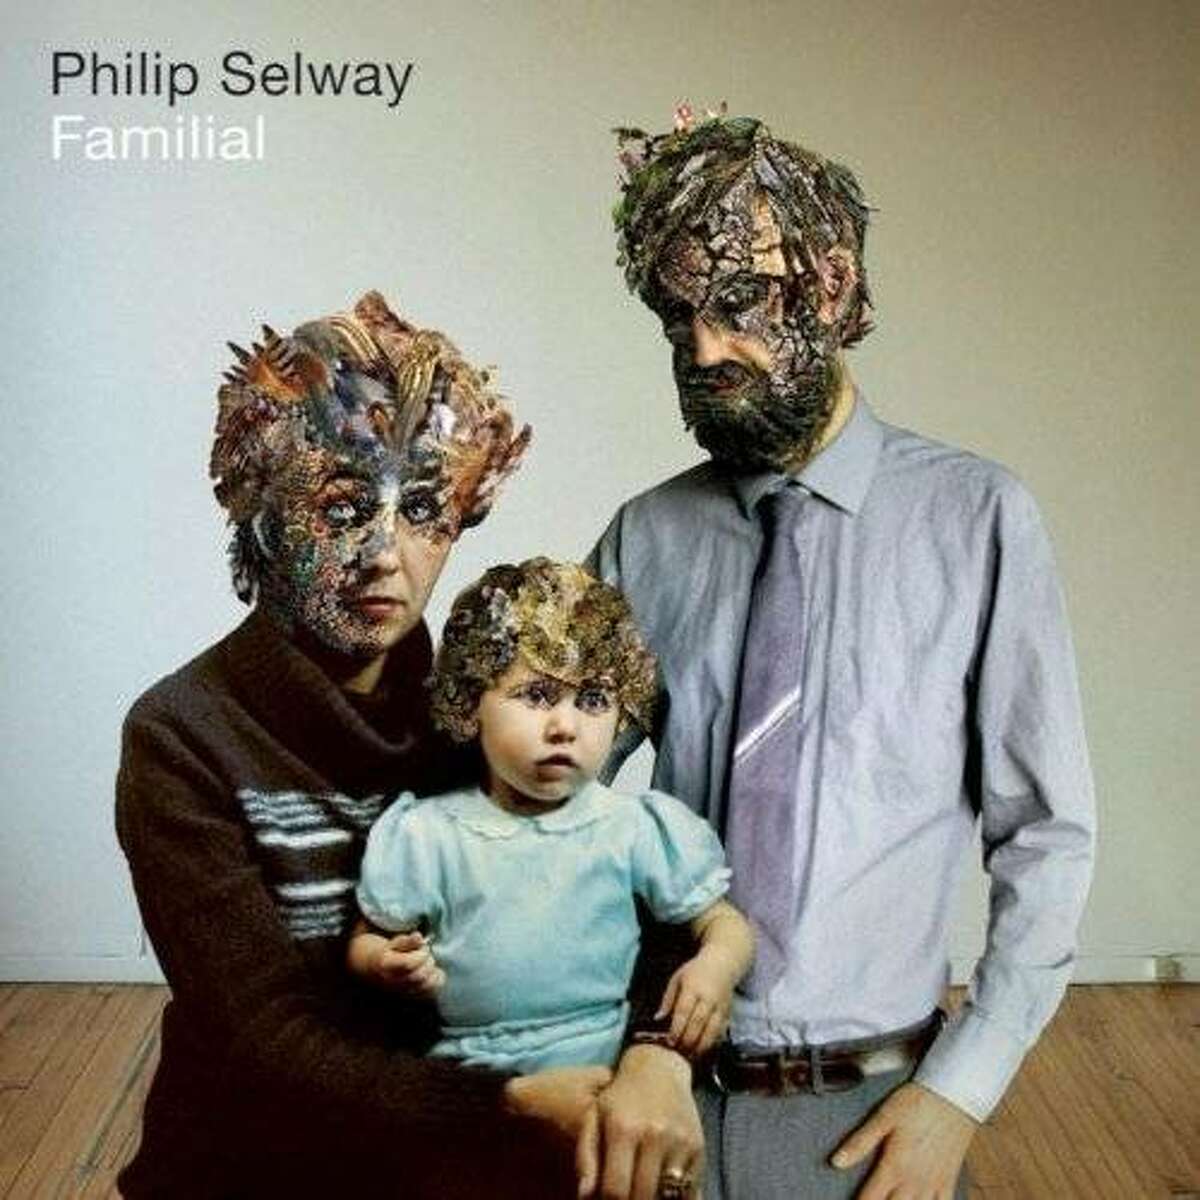 Philip Selway, Radiohead drummer, has a solo album that displays his talents as a folkie singer-songwriter.